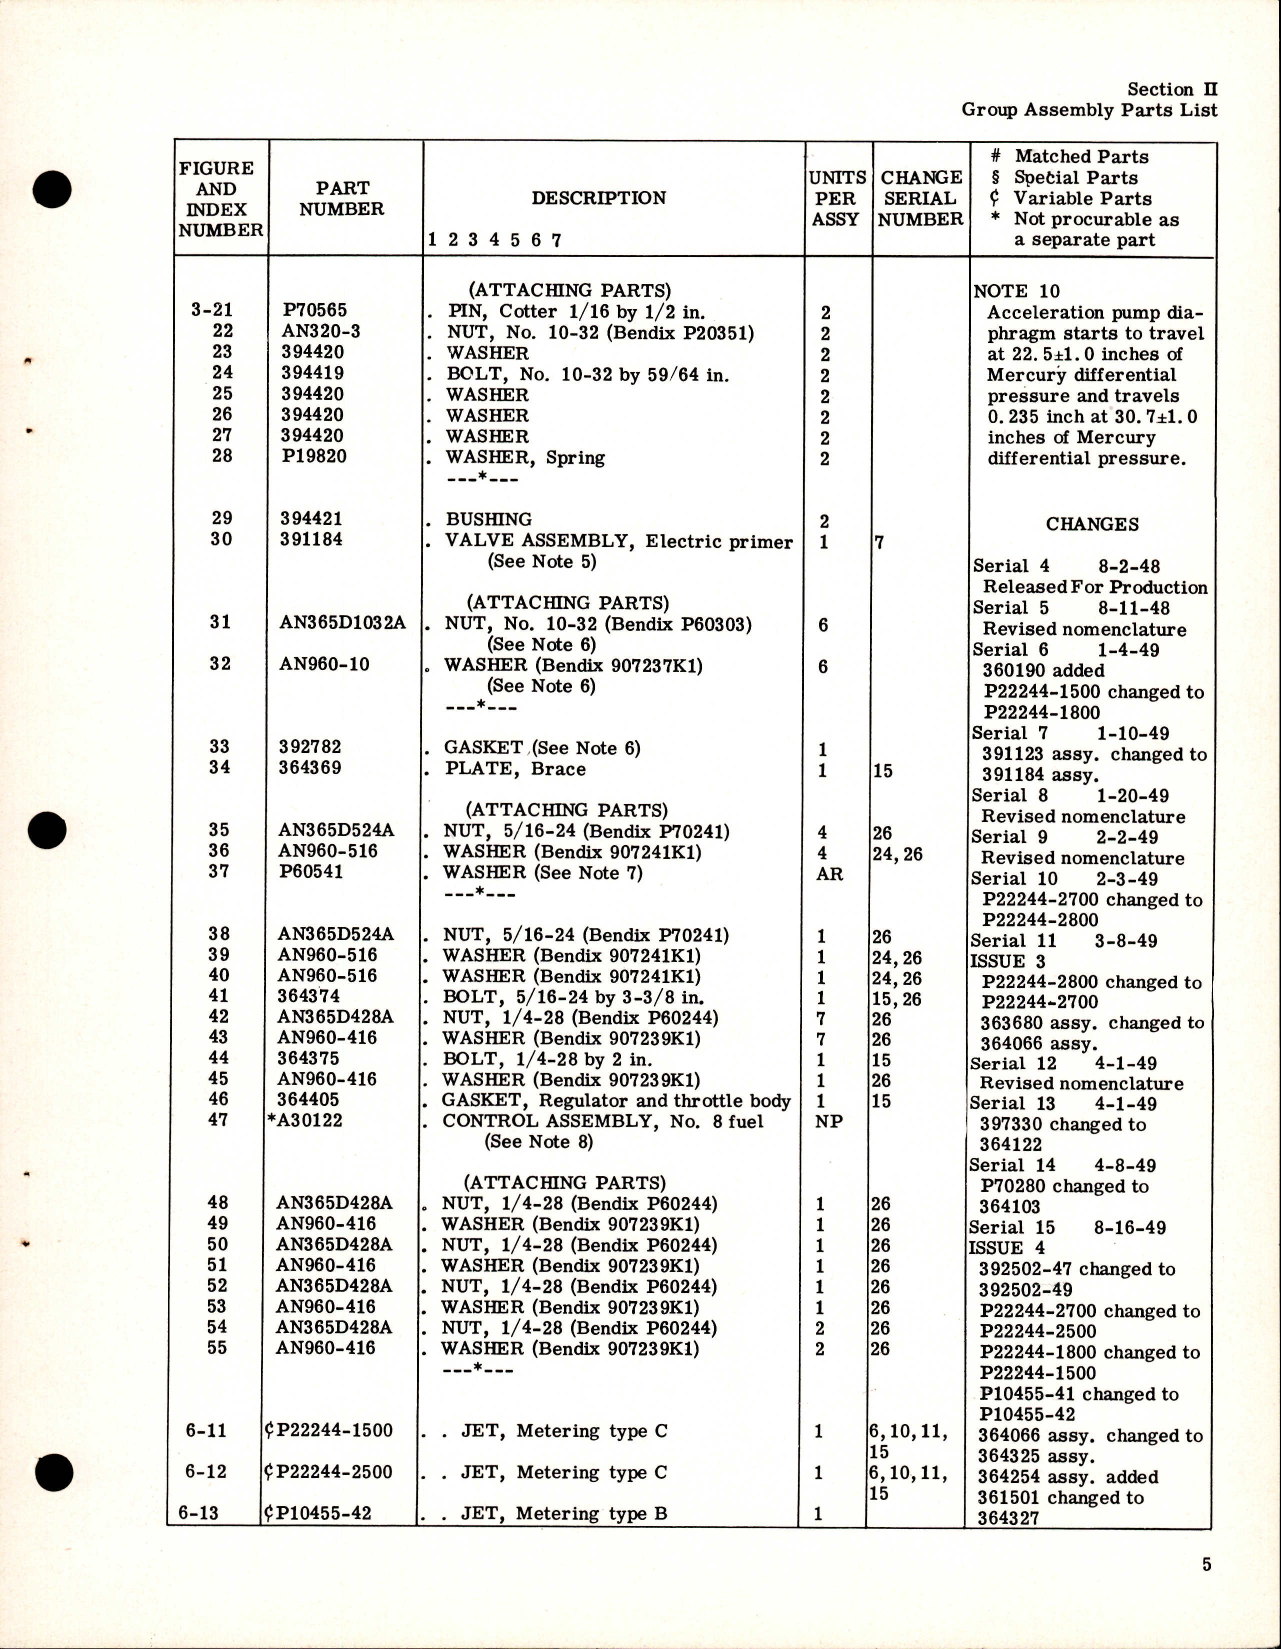 Sample page 5 from AirCorps Library document: Illustrated Parts Breakdown for Stromberg Injection Carburetor Model PD-9F1 